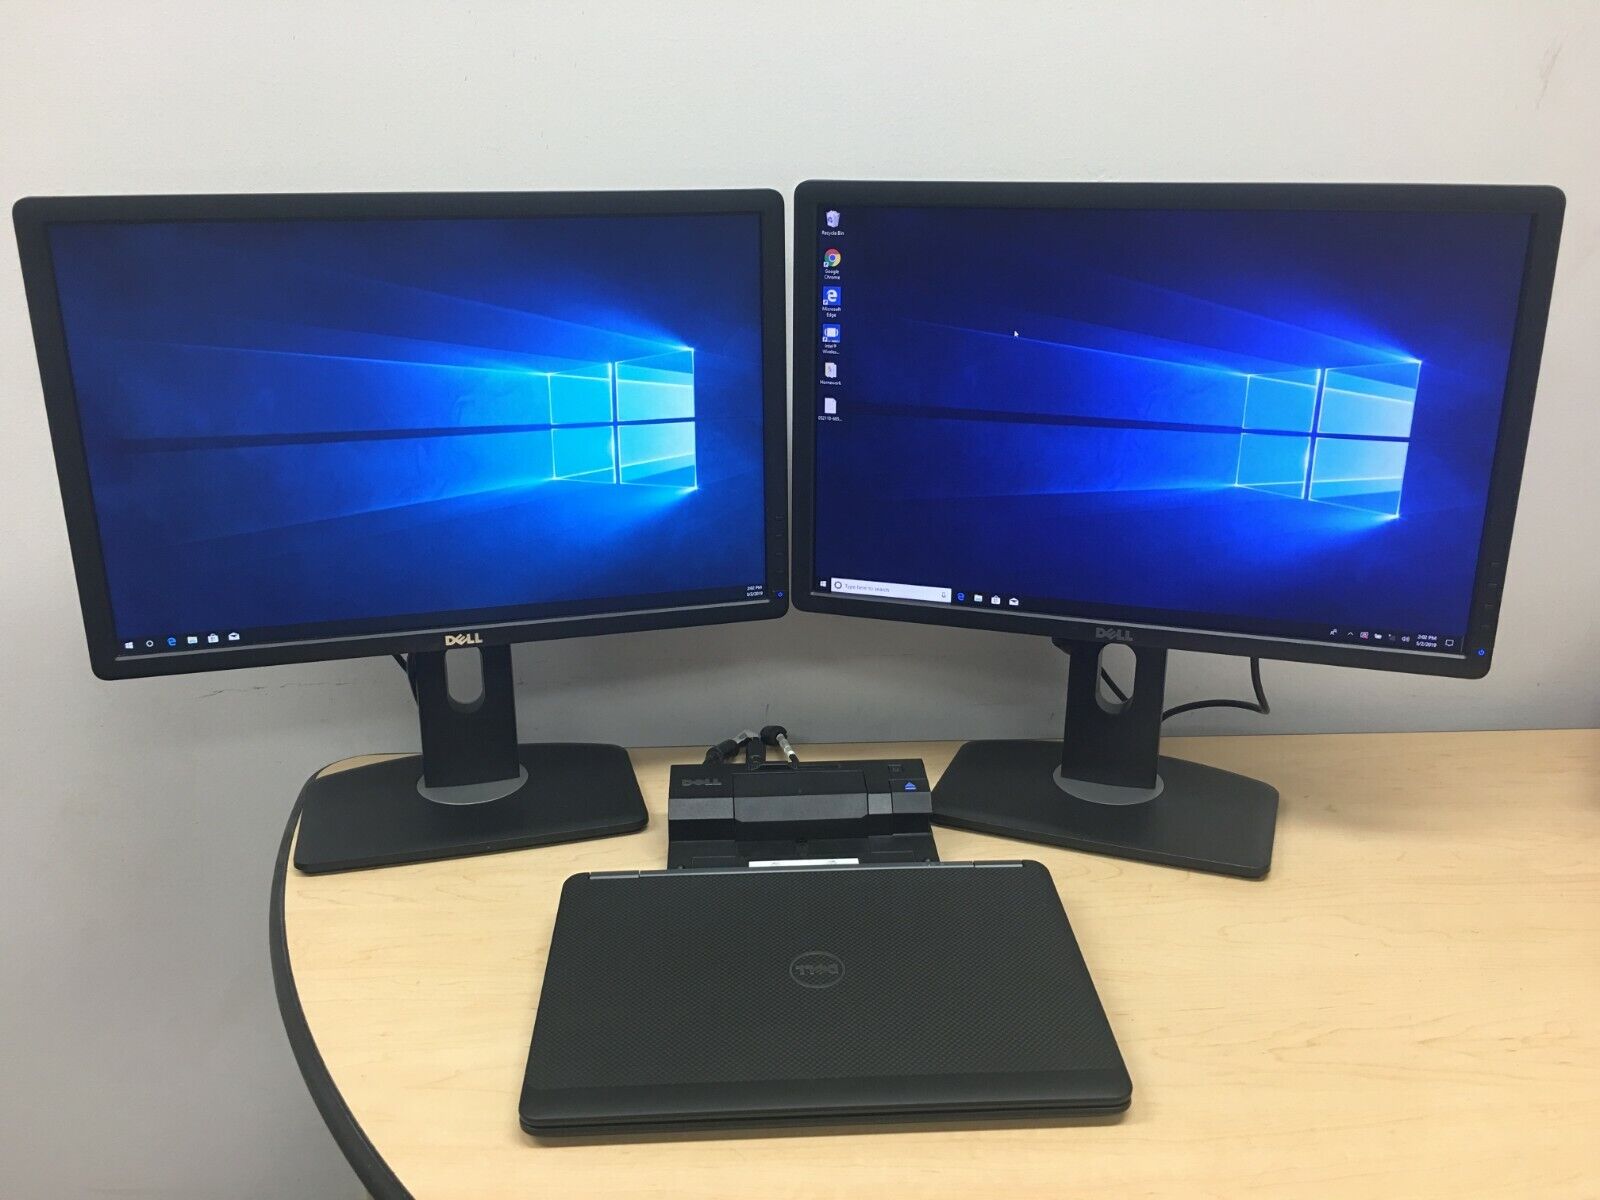 configuring-your-docking-station-for-dual-monitor-setup-step-by-step